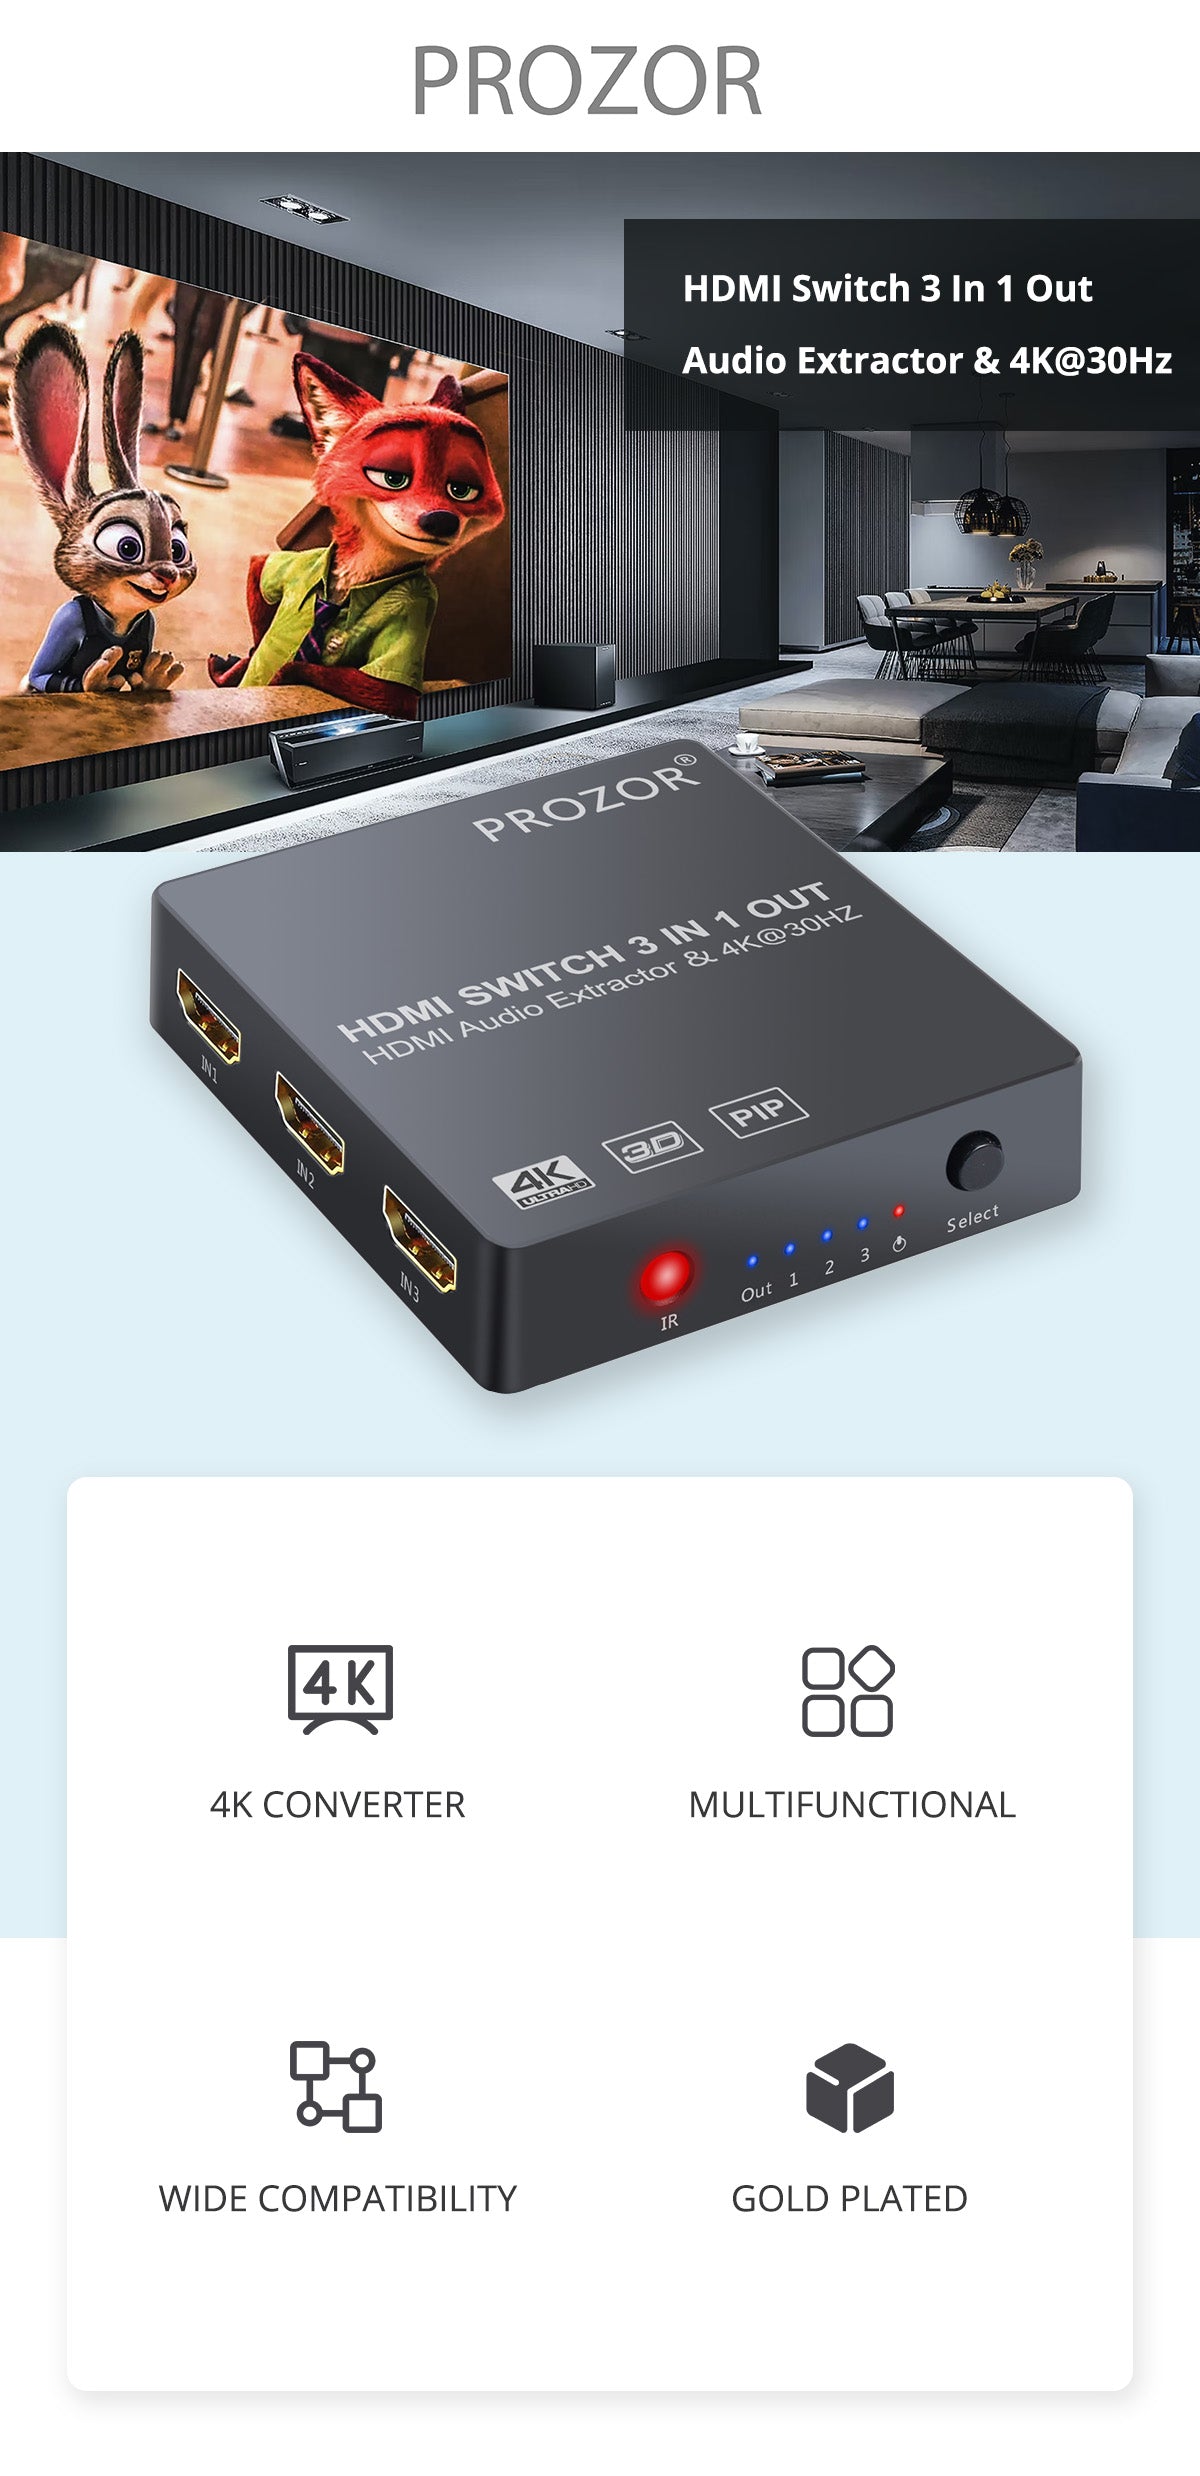 Prozor HDMI Switch 3 In 1 Out Audio Extractor & 4K@30Hz